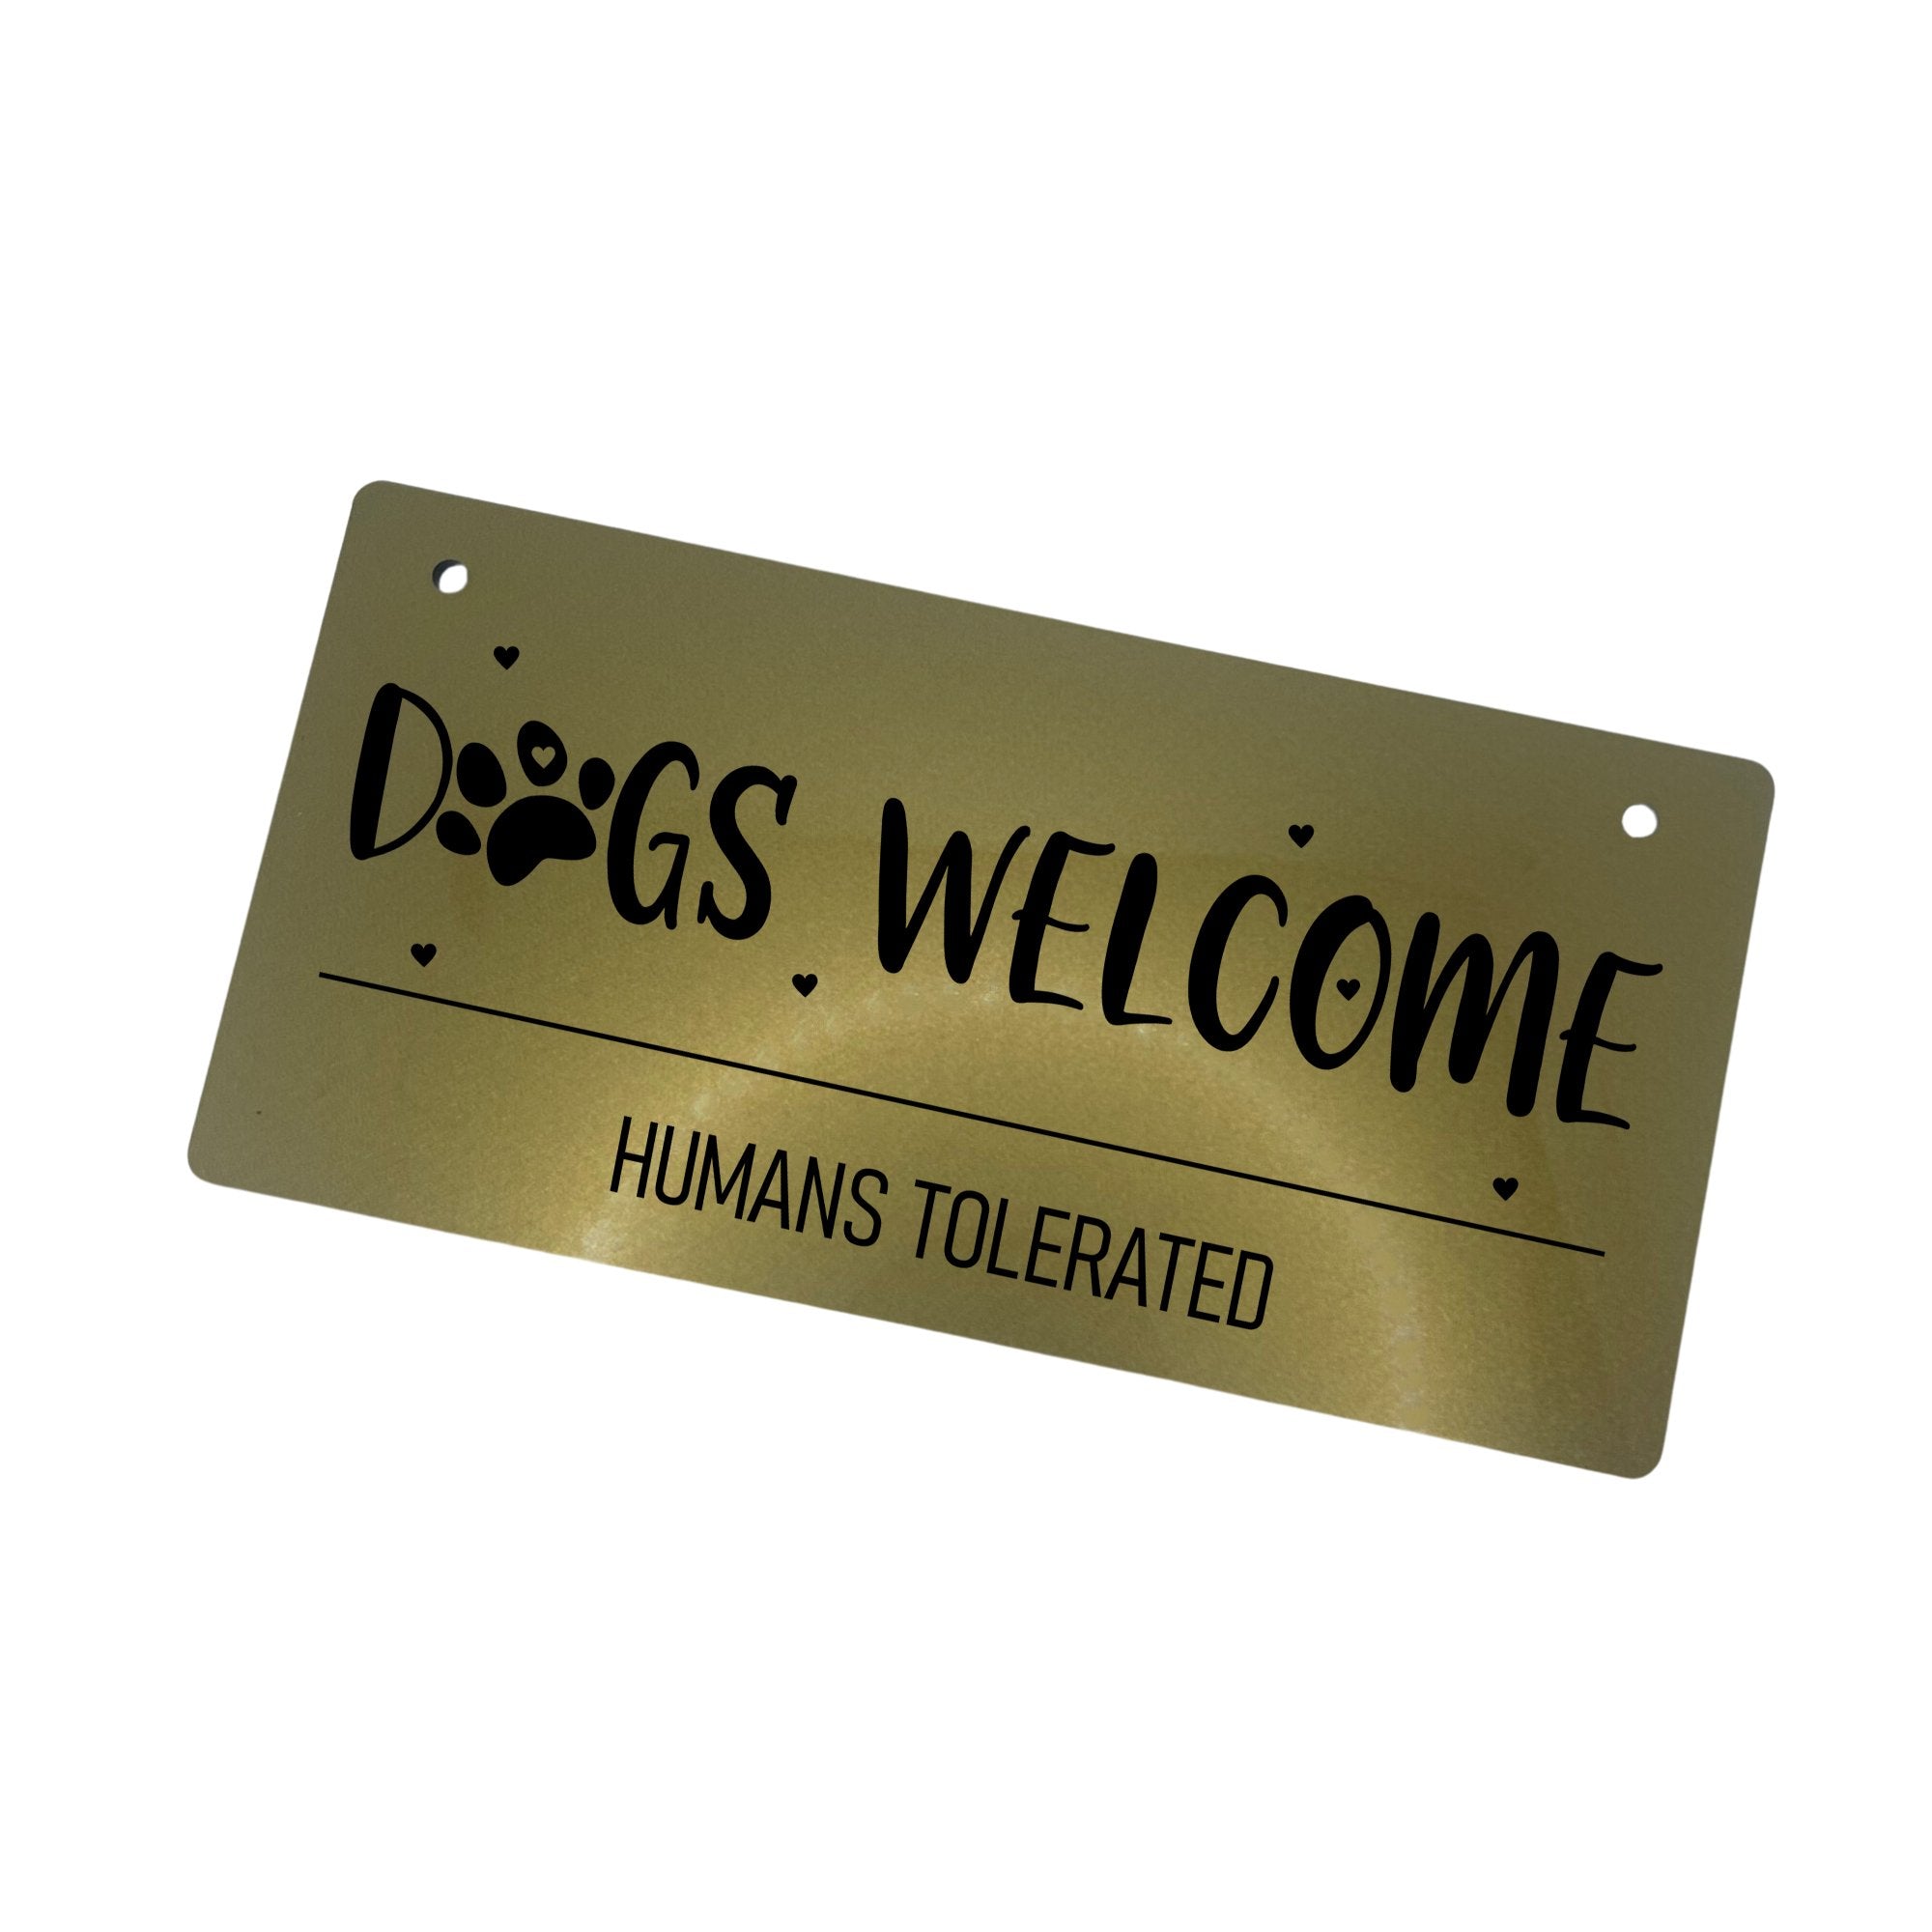 Sign displayed in a classic gold finish, offering a timeless and elegant aesthetic to suit various decor styles.